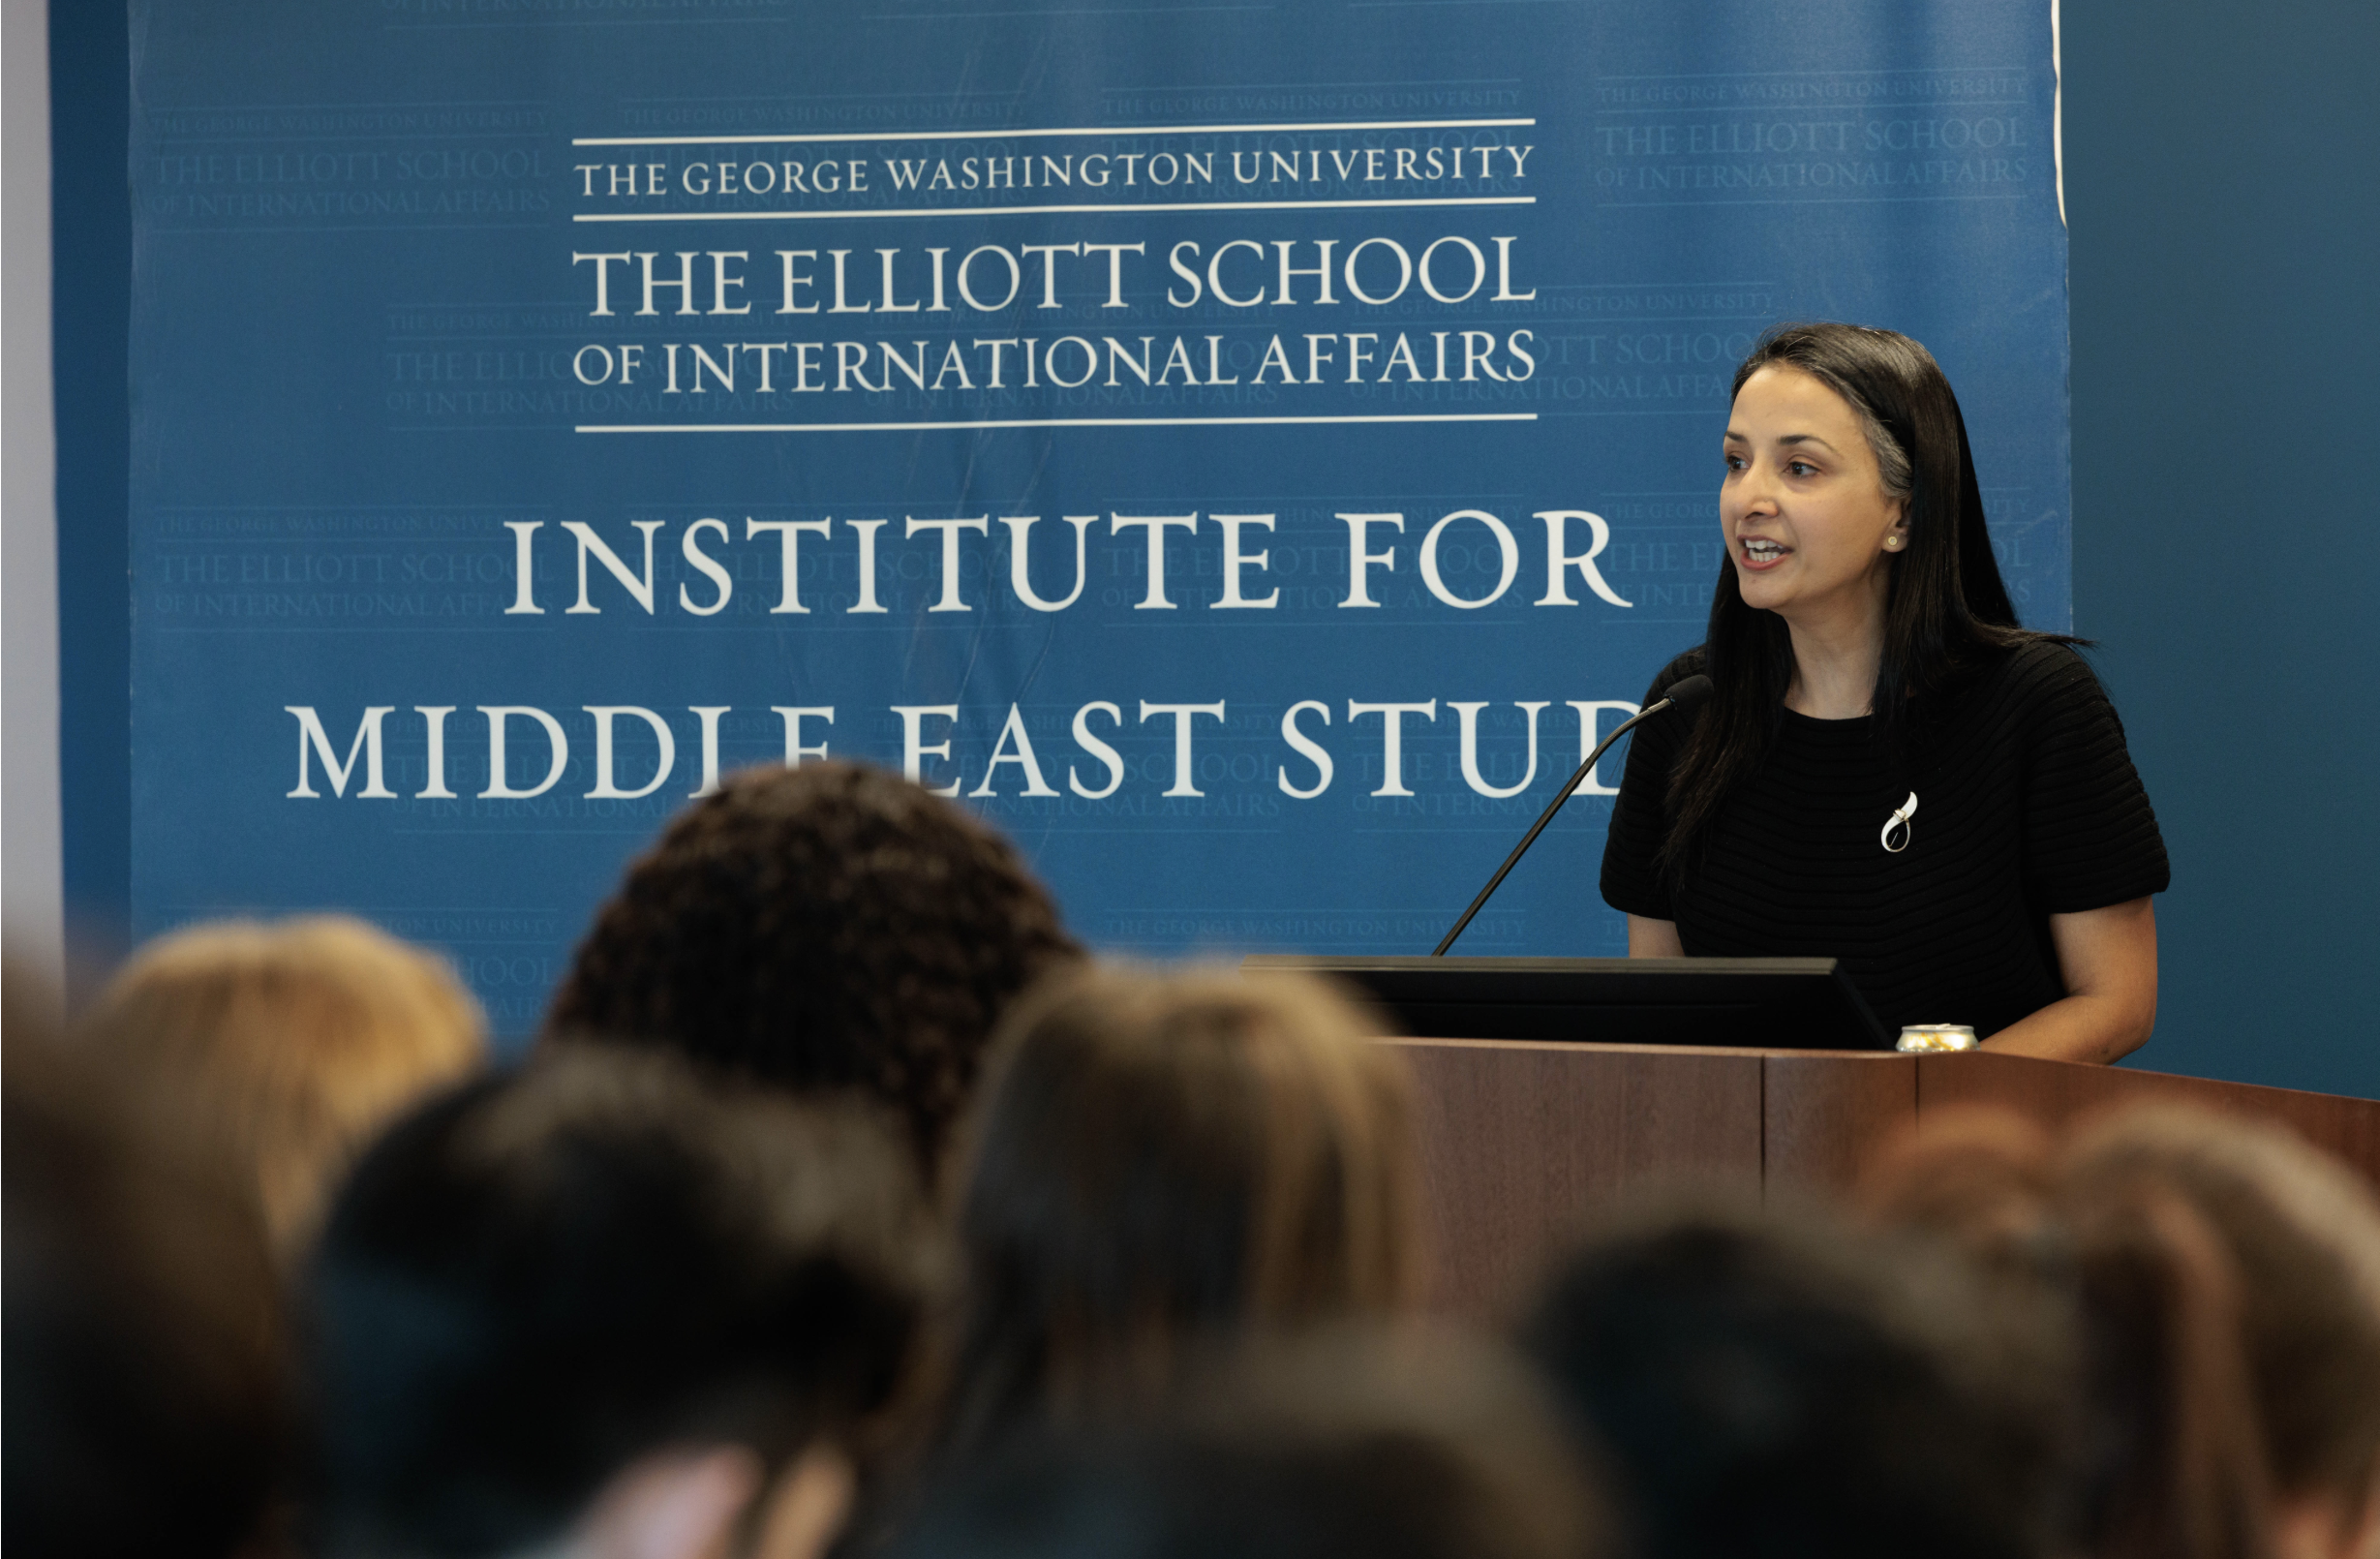 Attiya Ahmad, associate professor of anthropology and director of the Institute for Middle East Studies at GW